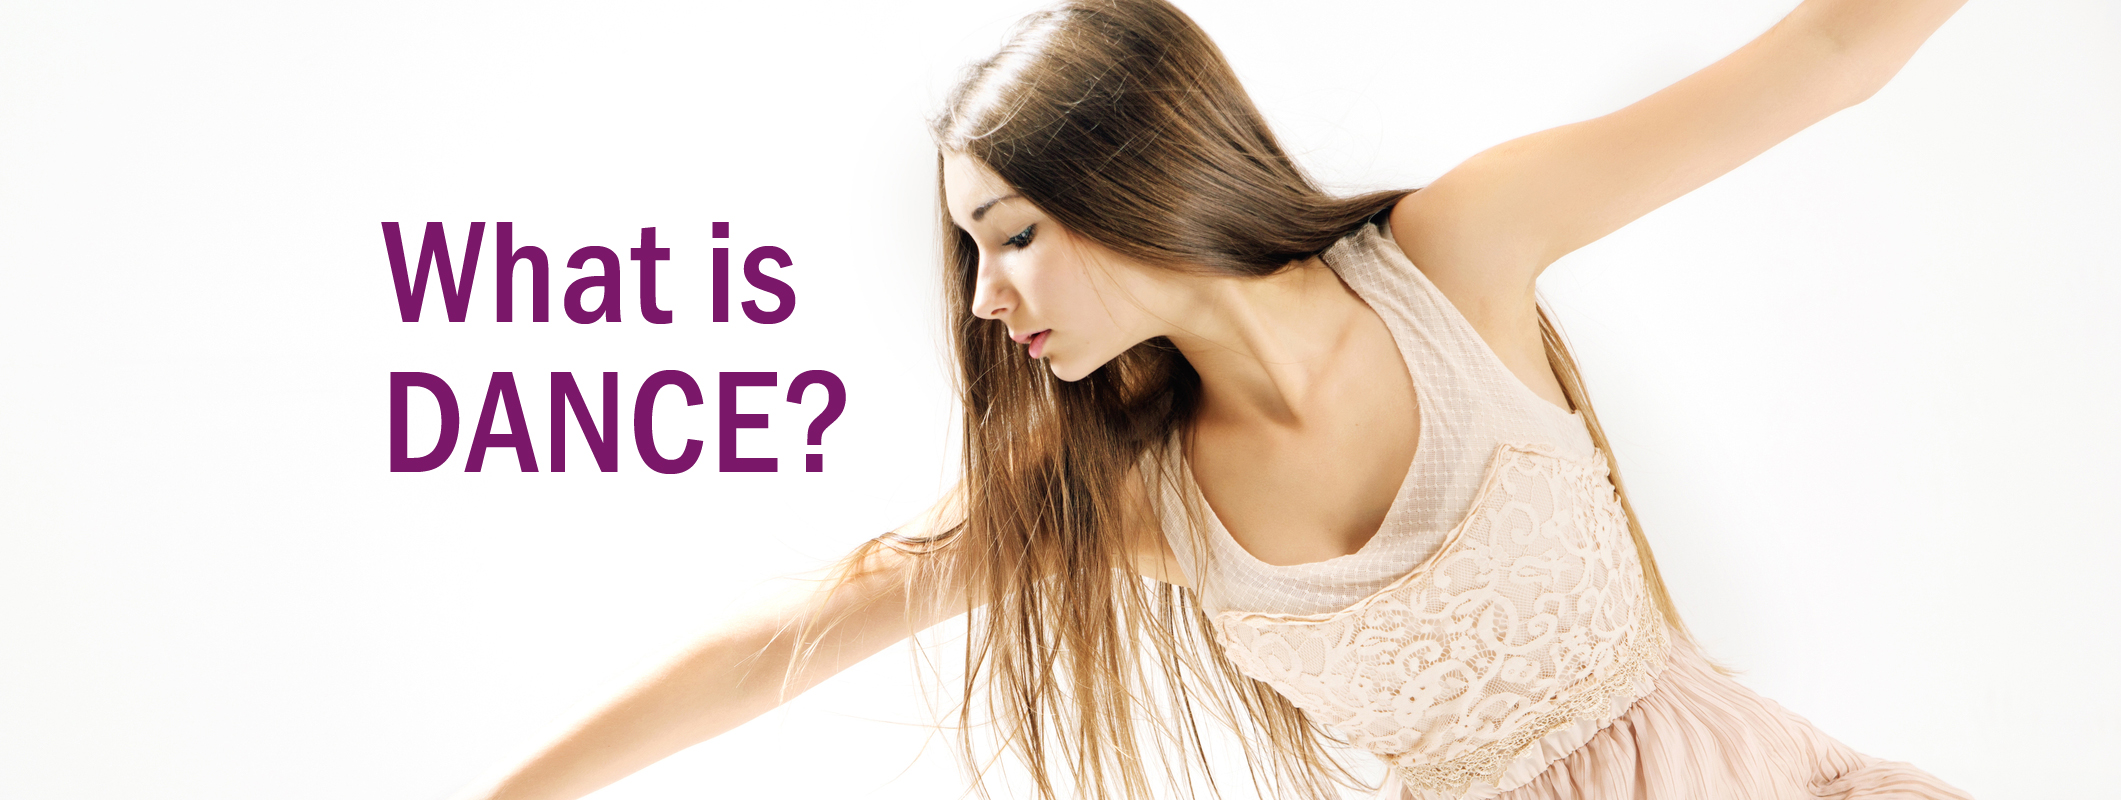 What is dance?